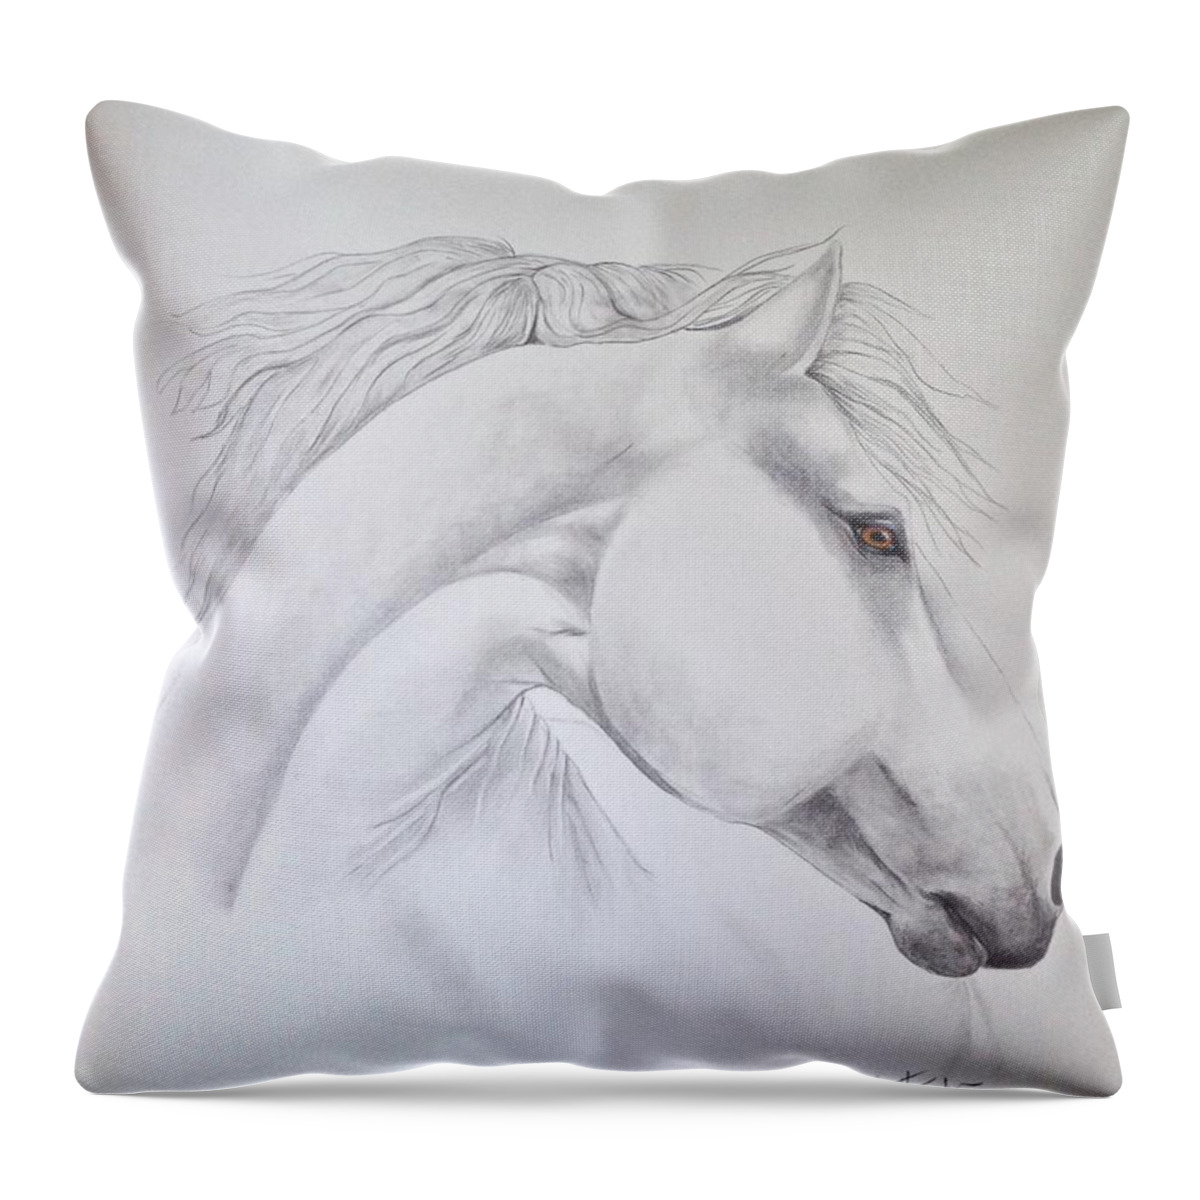 Horse. Horse Art Throw Pillow featuring the drawing Cavallo by Joette Snyder